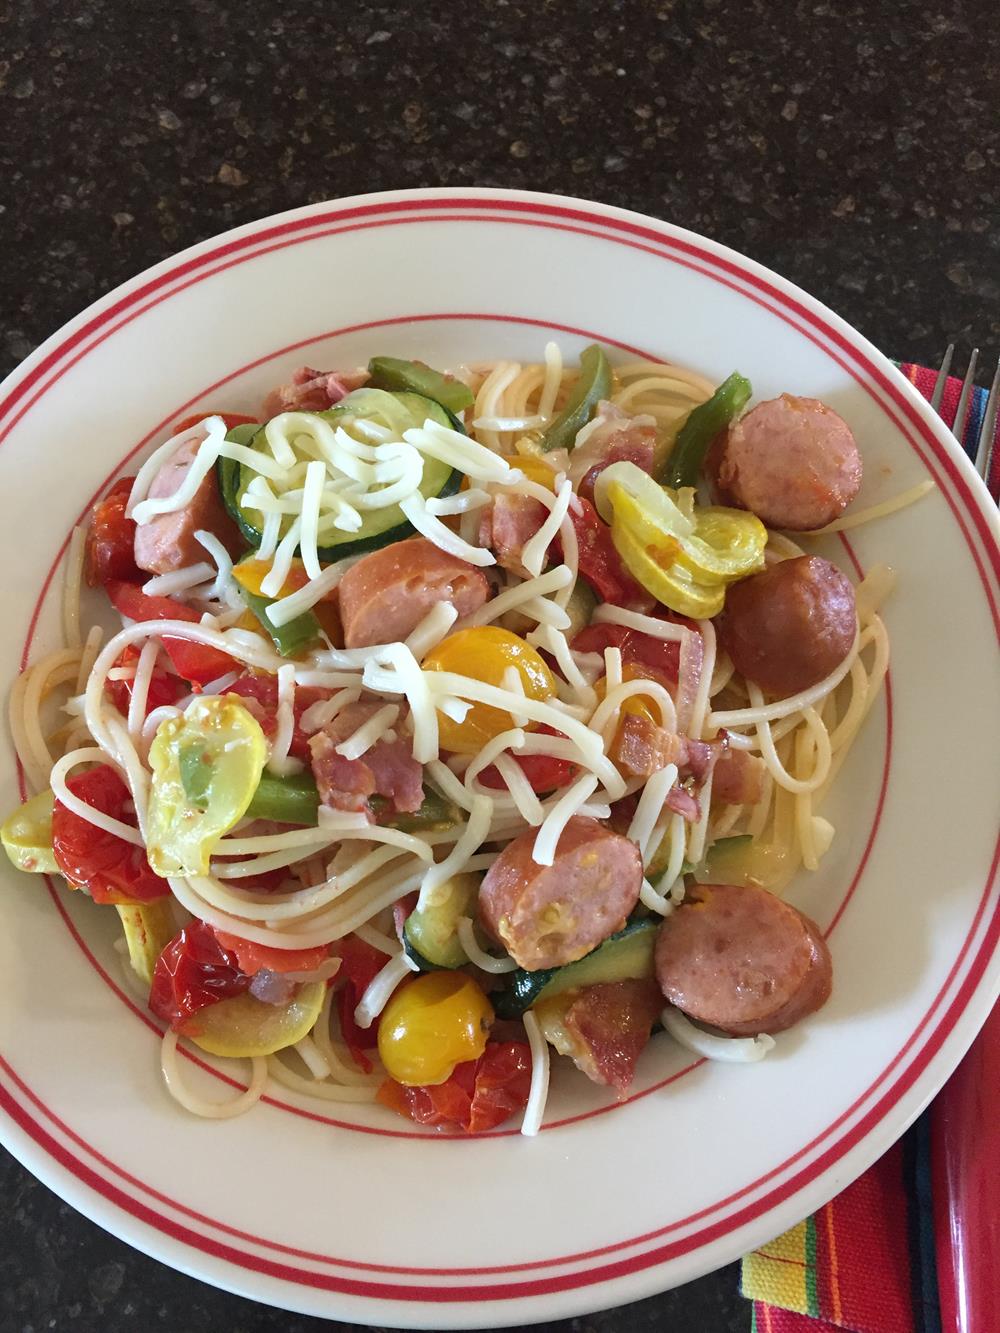 Pasta with Roasted Vegetables and Sausage on white plate with striped napkin in the background